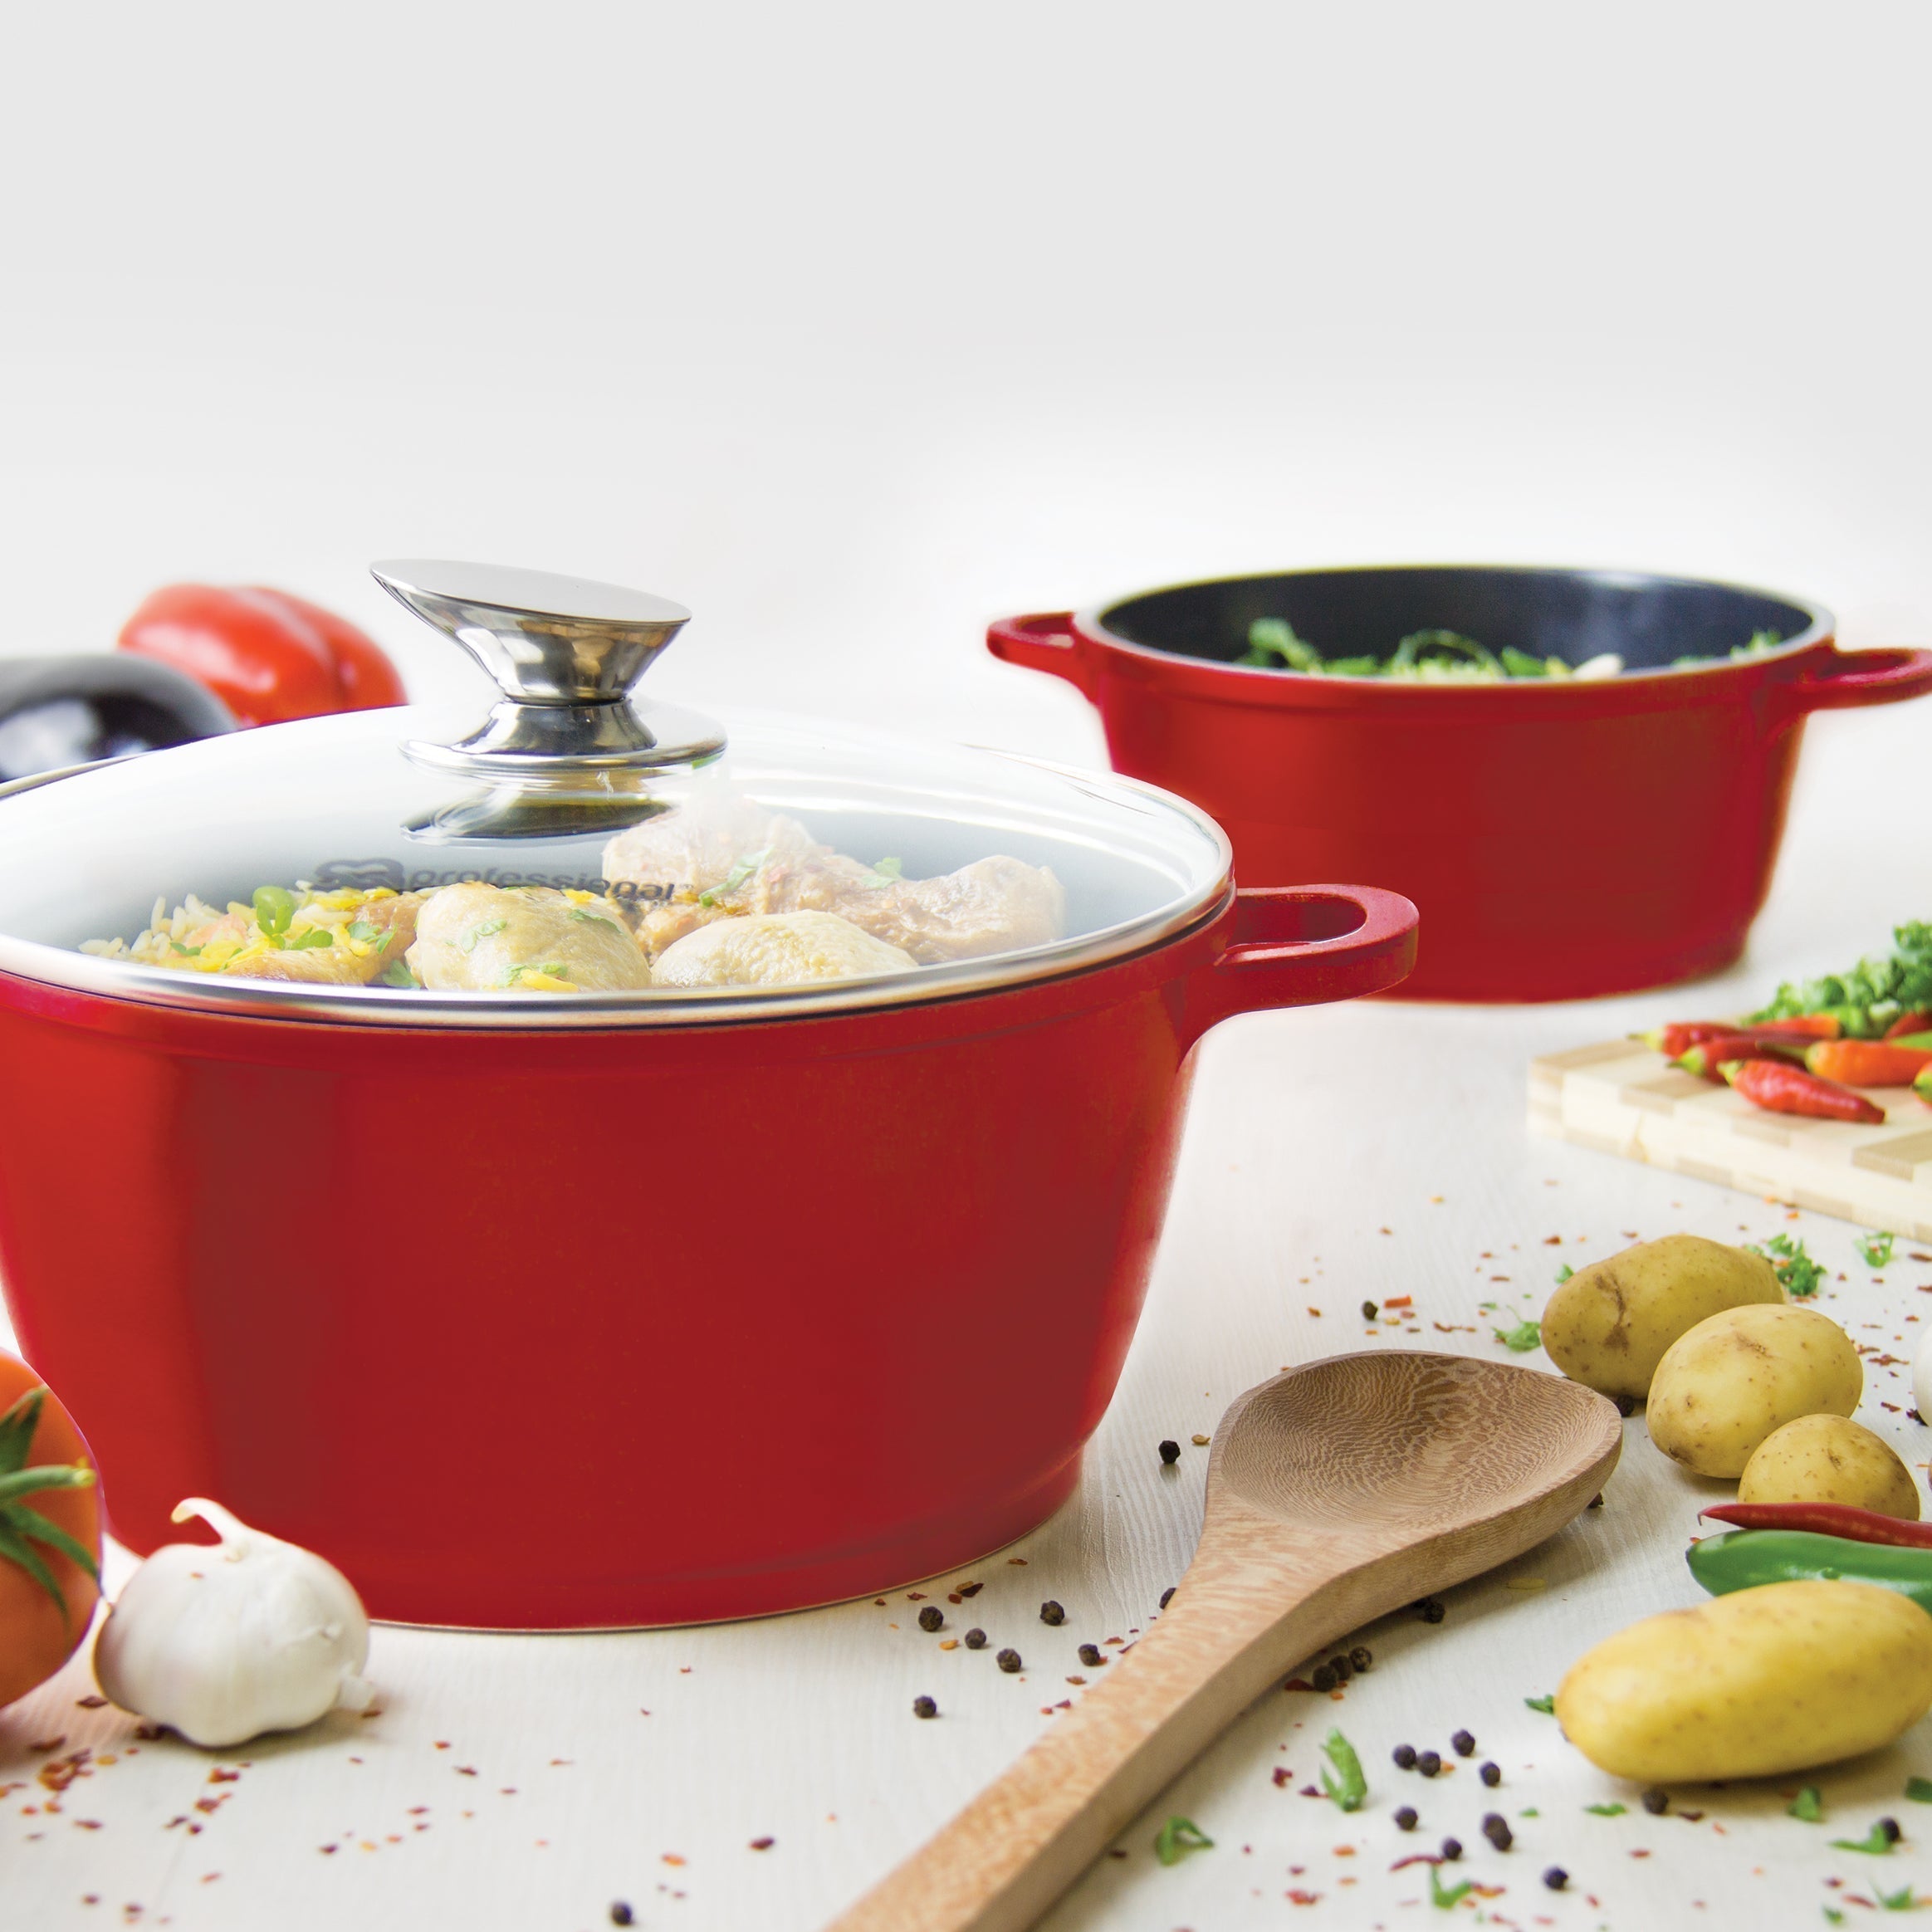 Die Cast Stockpot With Induction - NEA - Red - 32cm